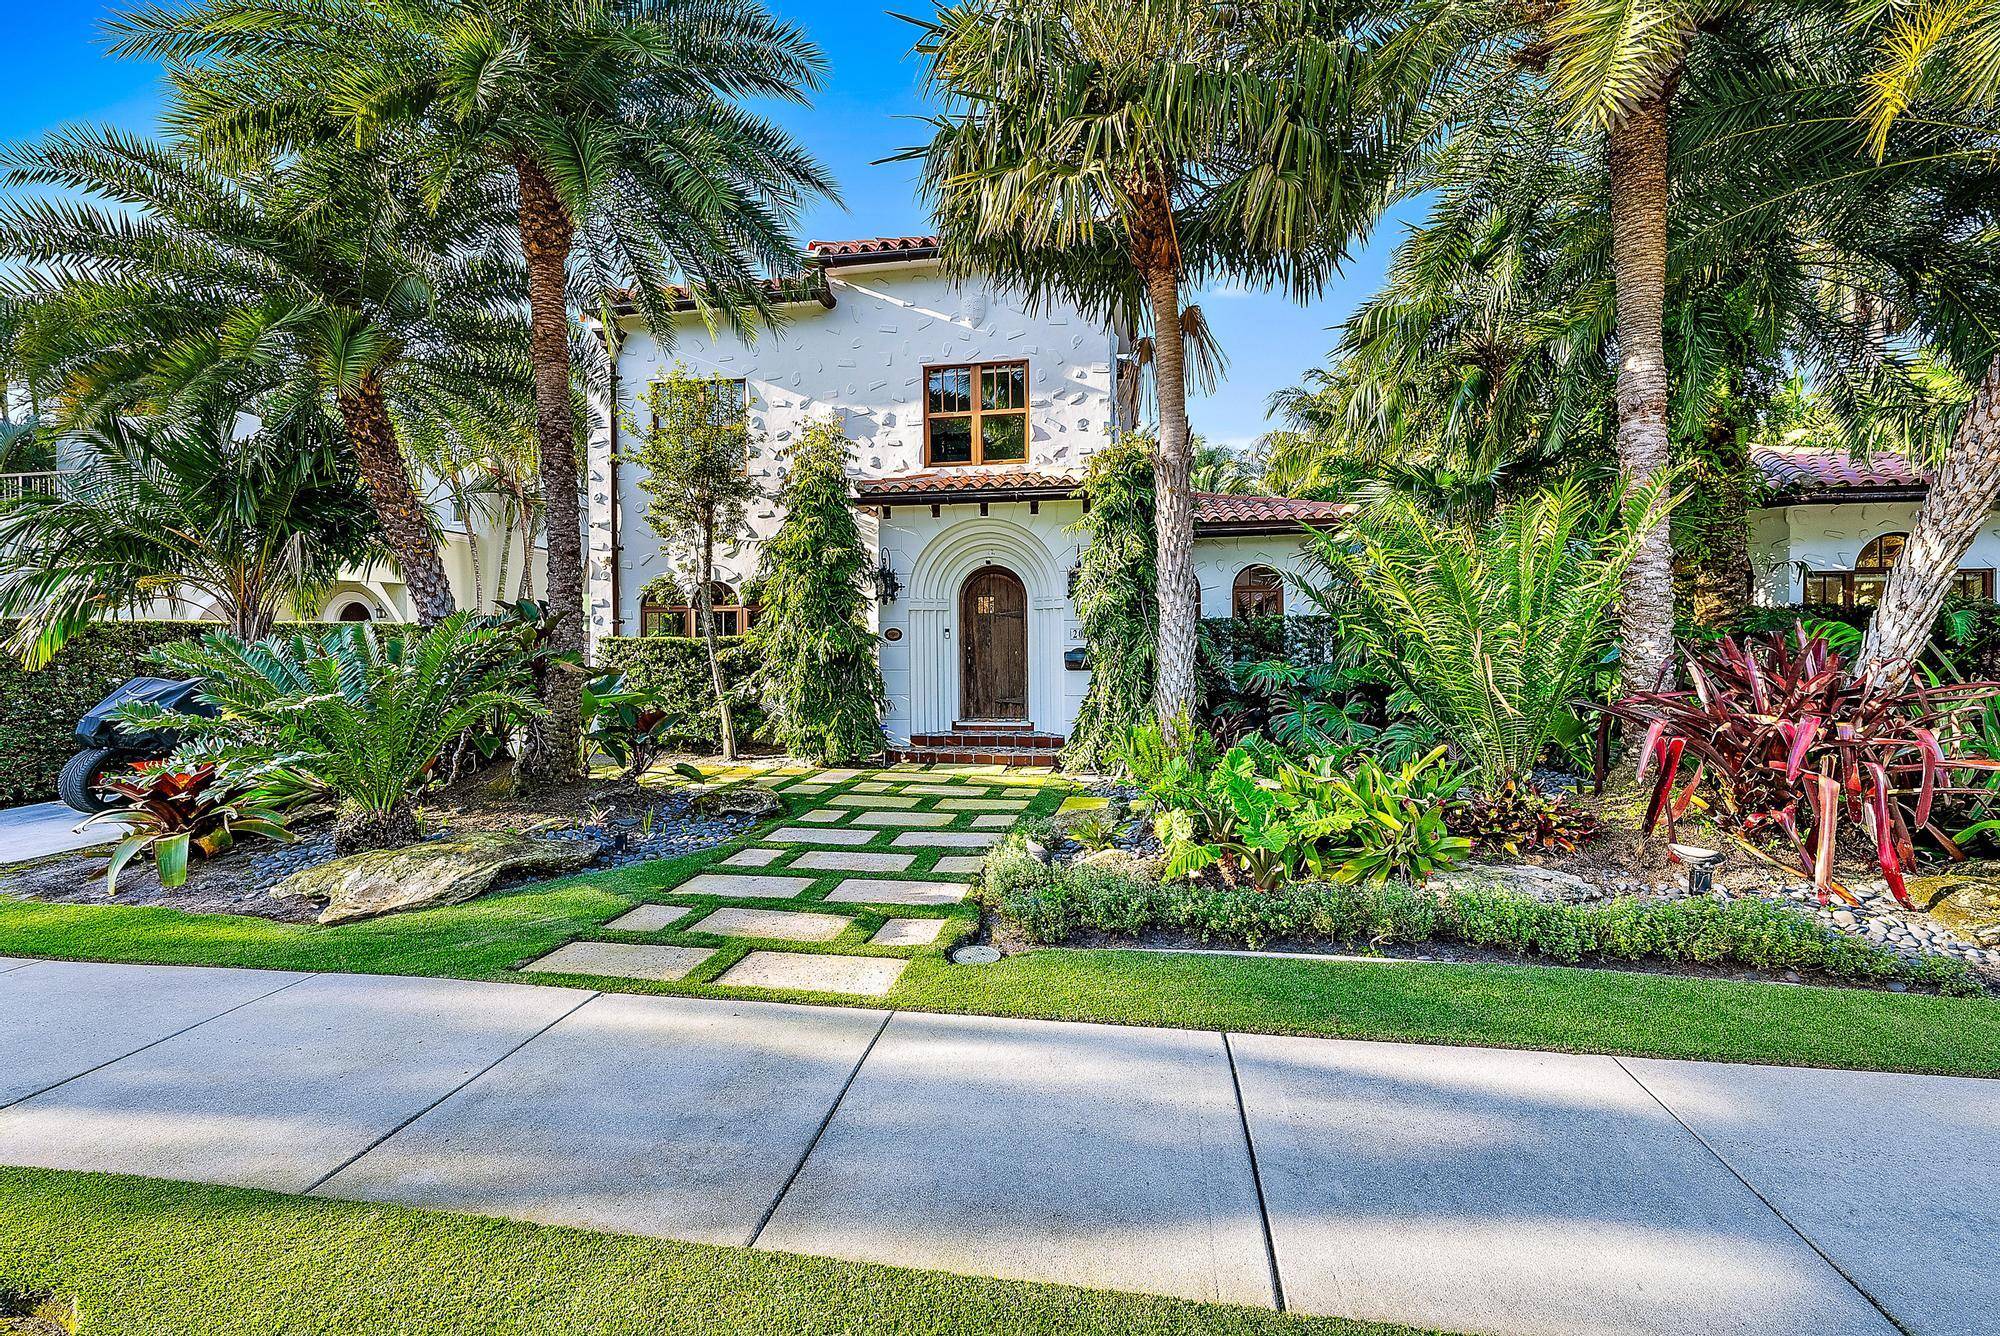 Welcome to a slice of paradise nestled in the heart of West Palm Beach.